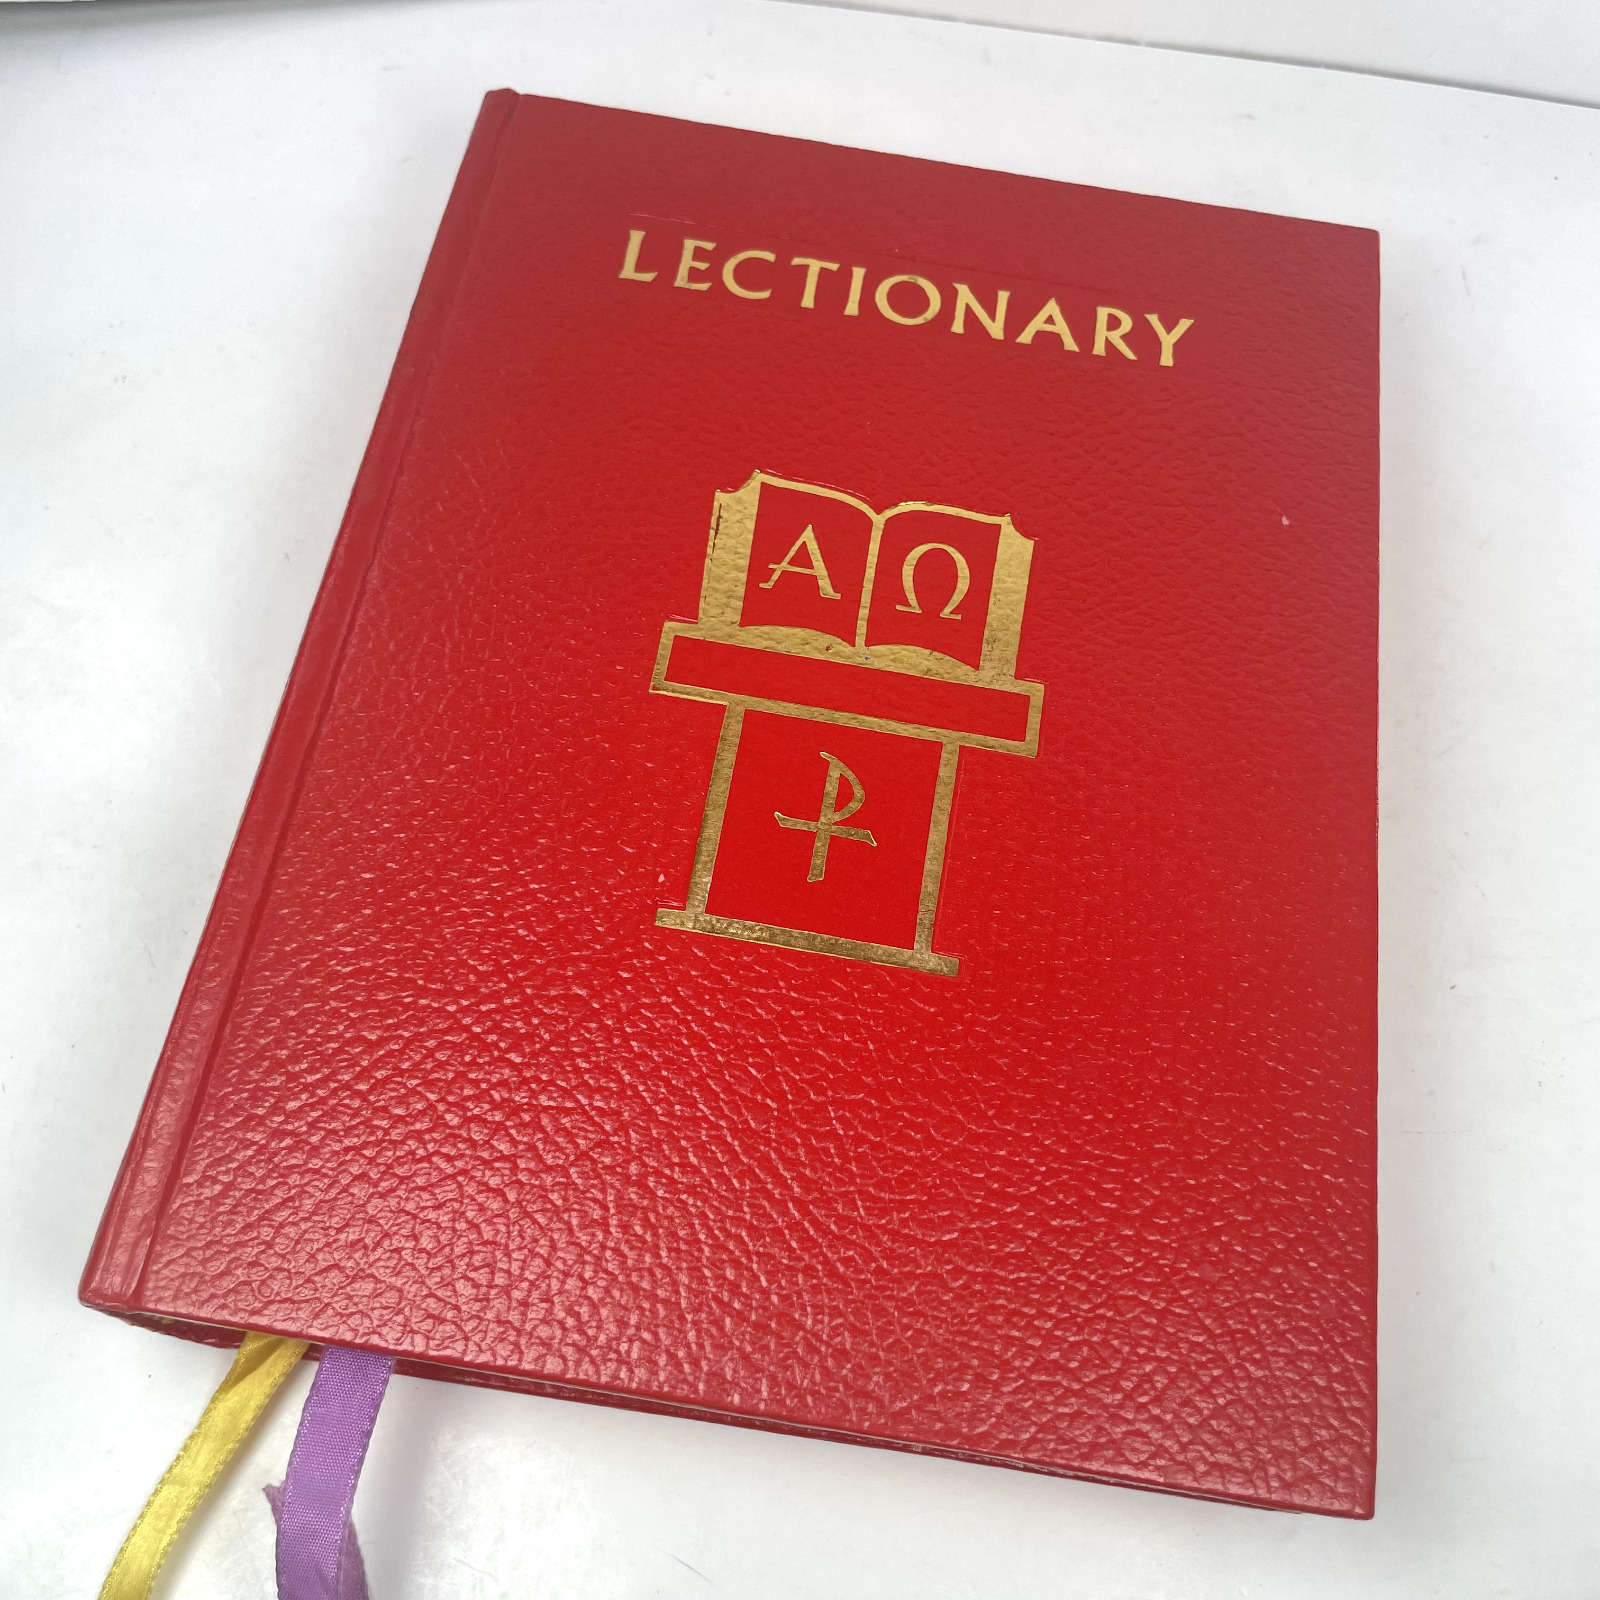 THE ROMAN MISSAL  LECTIONARY FOR MASS  ALTAR MISSAL  CATH. BOOK PUB CO 1970